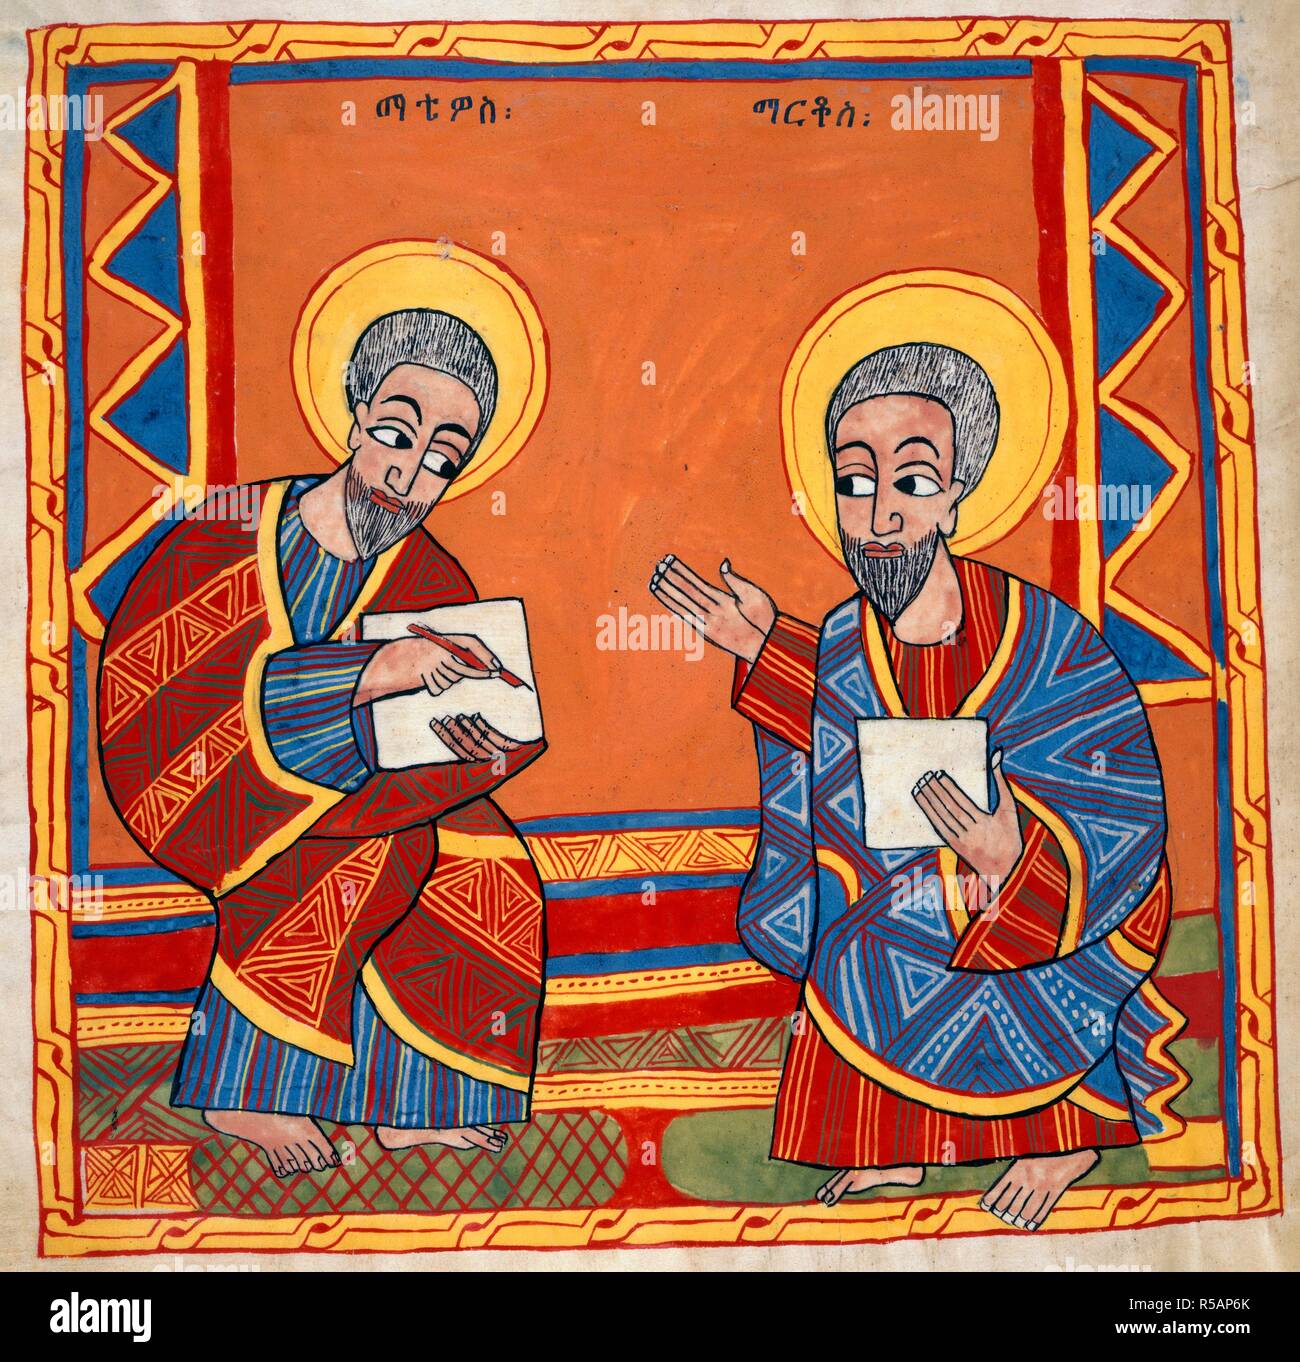 Evangelists. Octateuch, Four Gospels and Synodicon. Gondar, late 17th century. Image of Saint Luke and Saint John the Evangelists. Parchment manuscript.  Image taken from Octateuch, Four Gospels and Synodicon.  Originally published/produced in Gondar, late 17th century. . Source: Or. 481, f.125v. Language: Ethiopic. Stock Photo